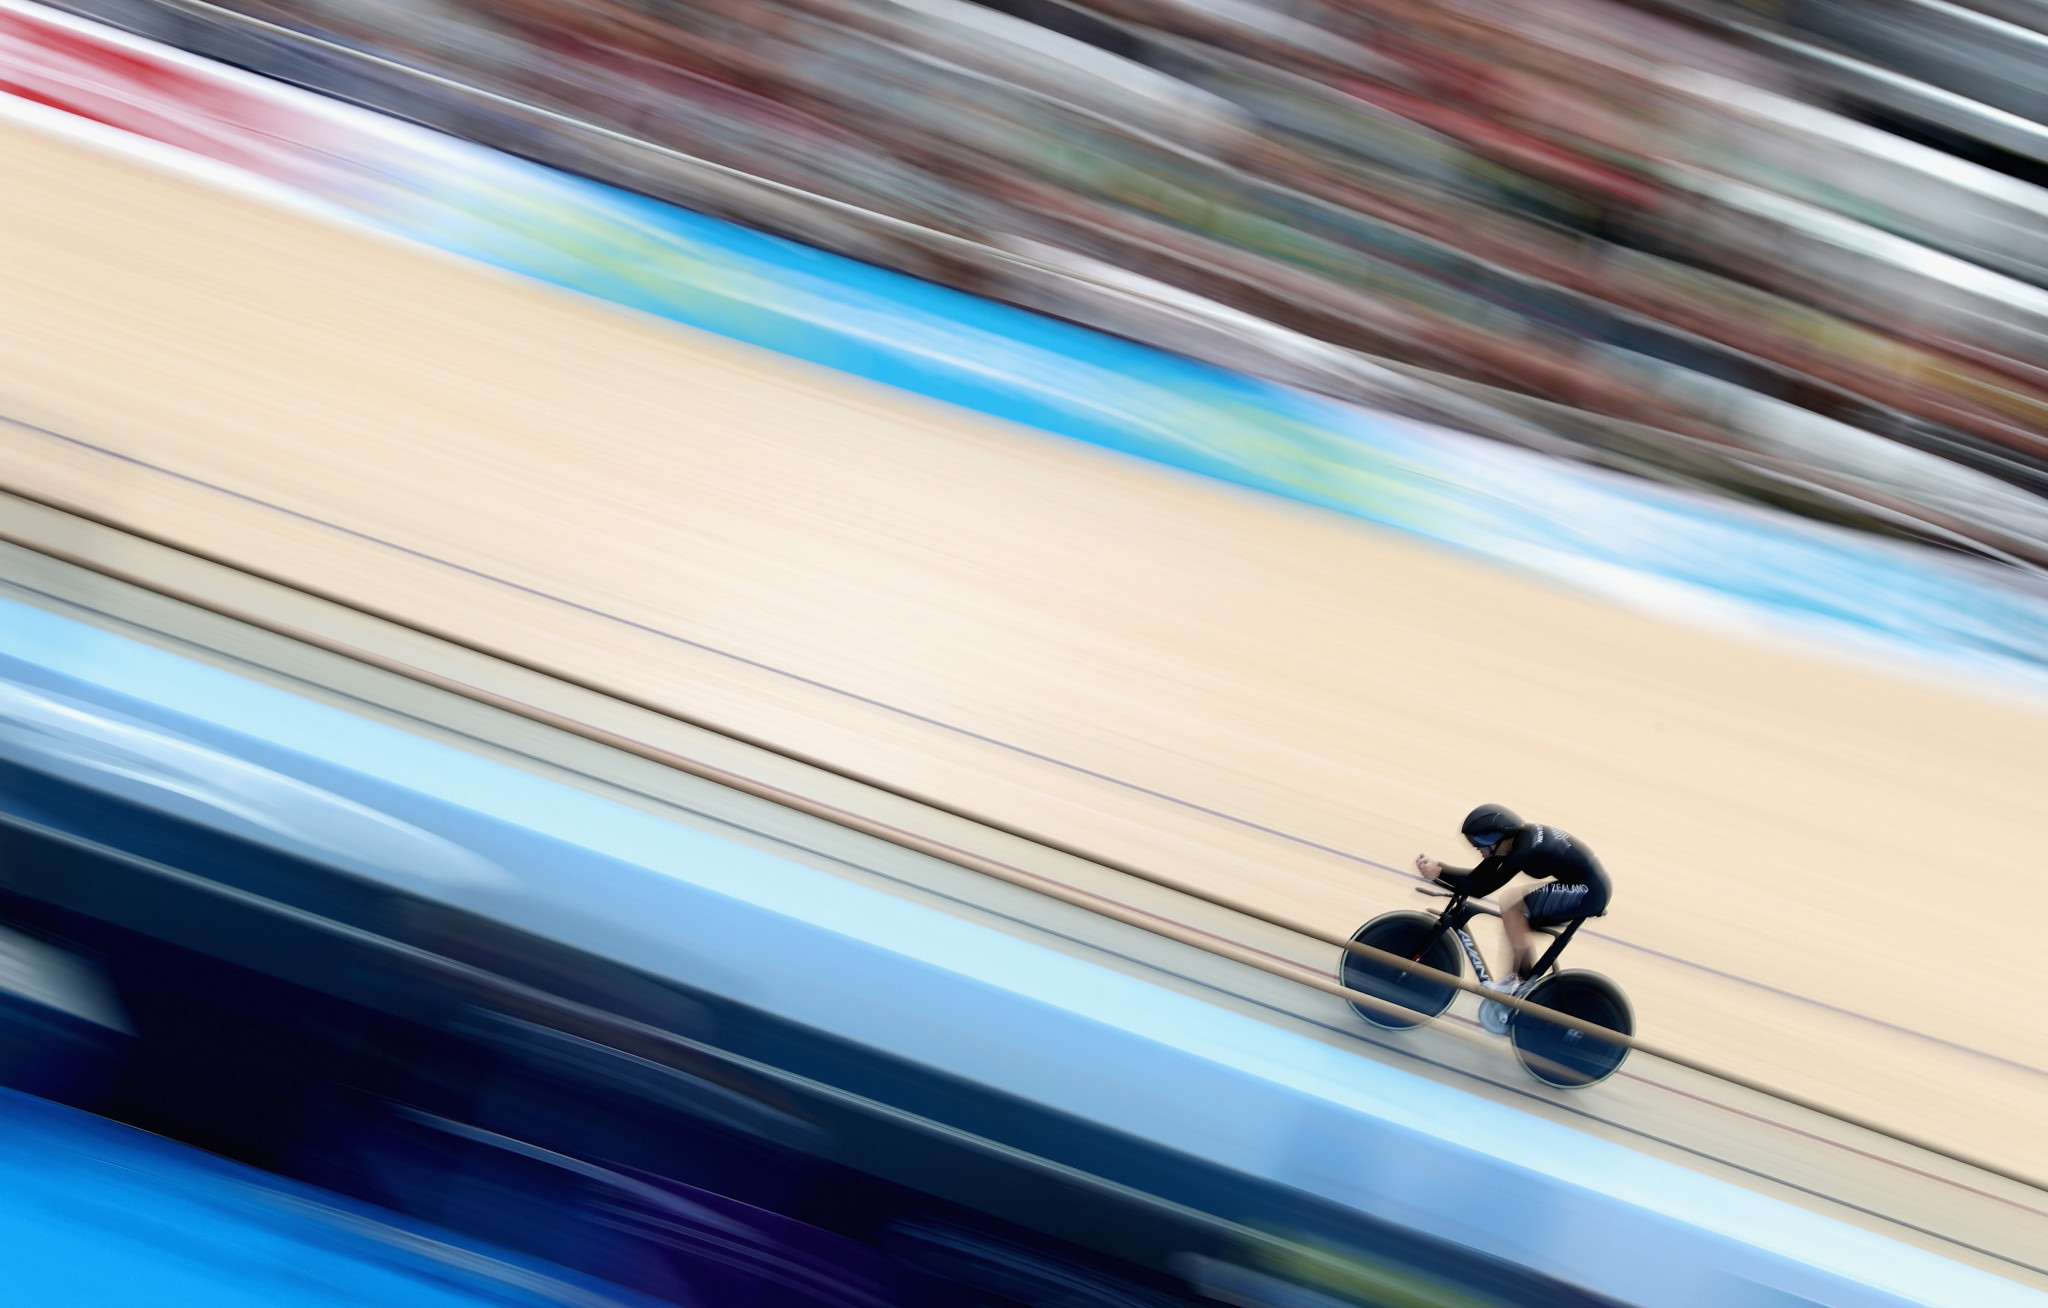 Ellesse Andrews took gold in the women's keirin ©Getty Images